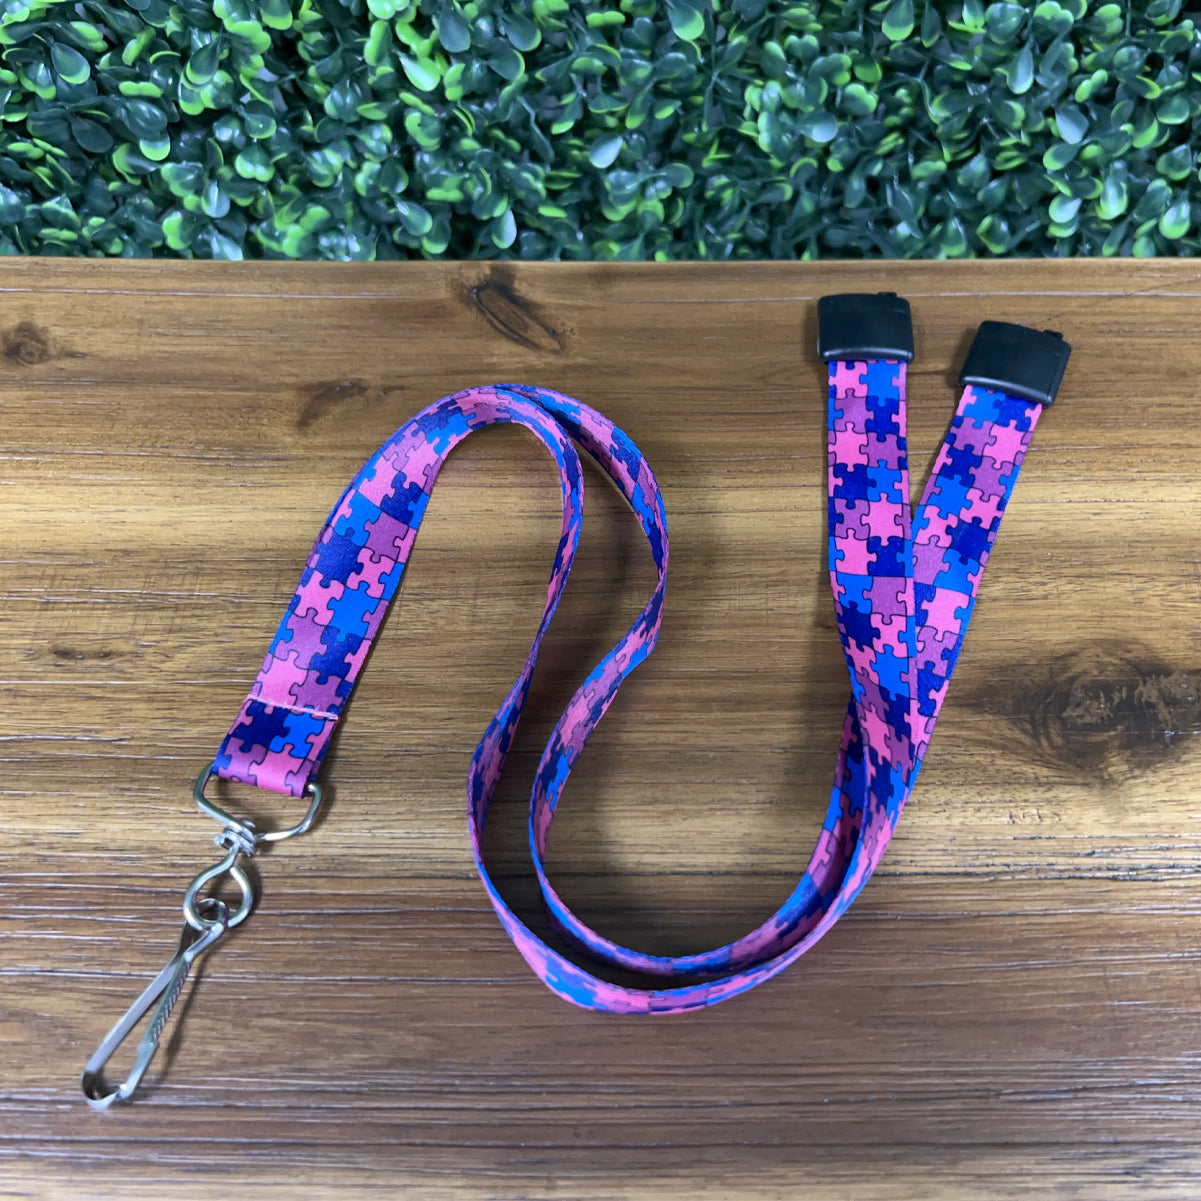 An Autism Awareness Flat Breakaway Lanyard With Swivel Hook (2138-5281, 2138-5282) with a blue and pink puzzle piece pattern is laid out on a wooden surface with a green leafy background. It features a silver swivel hook clasp.